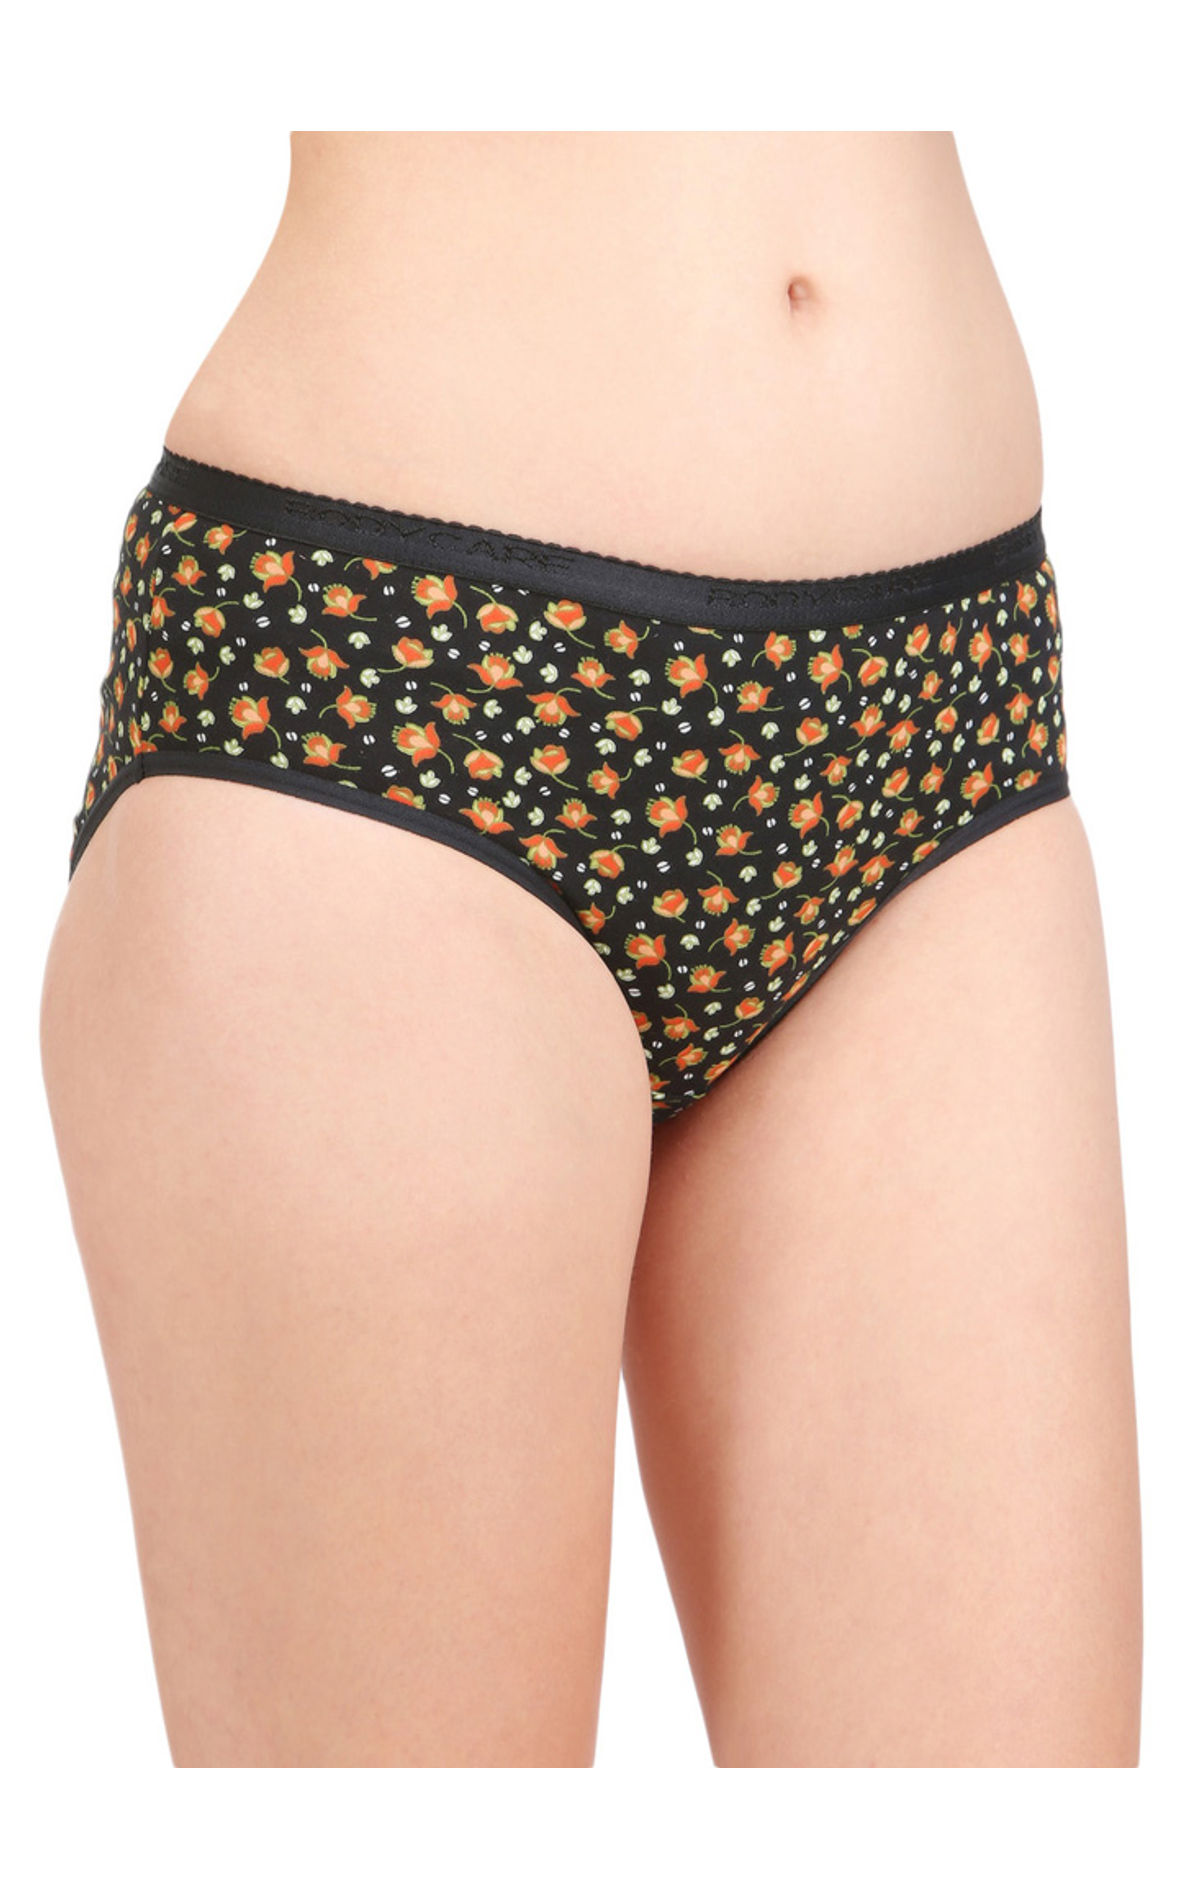 Buy BODYCARE Women's Printed Cotton Briefs (Assorted; 32) - Pack of 6 at